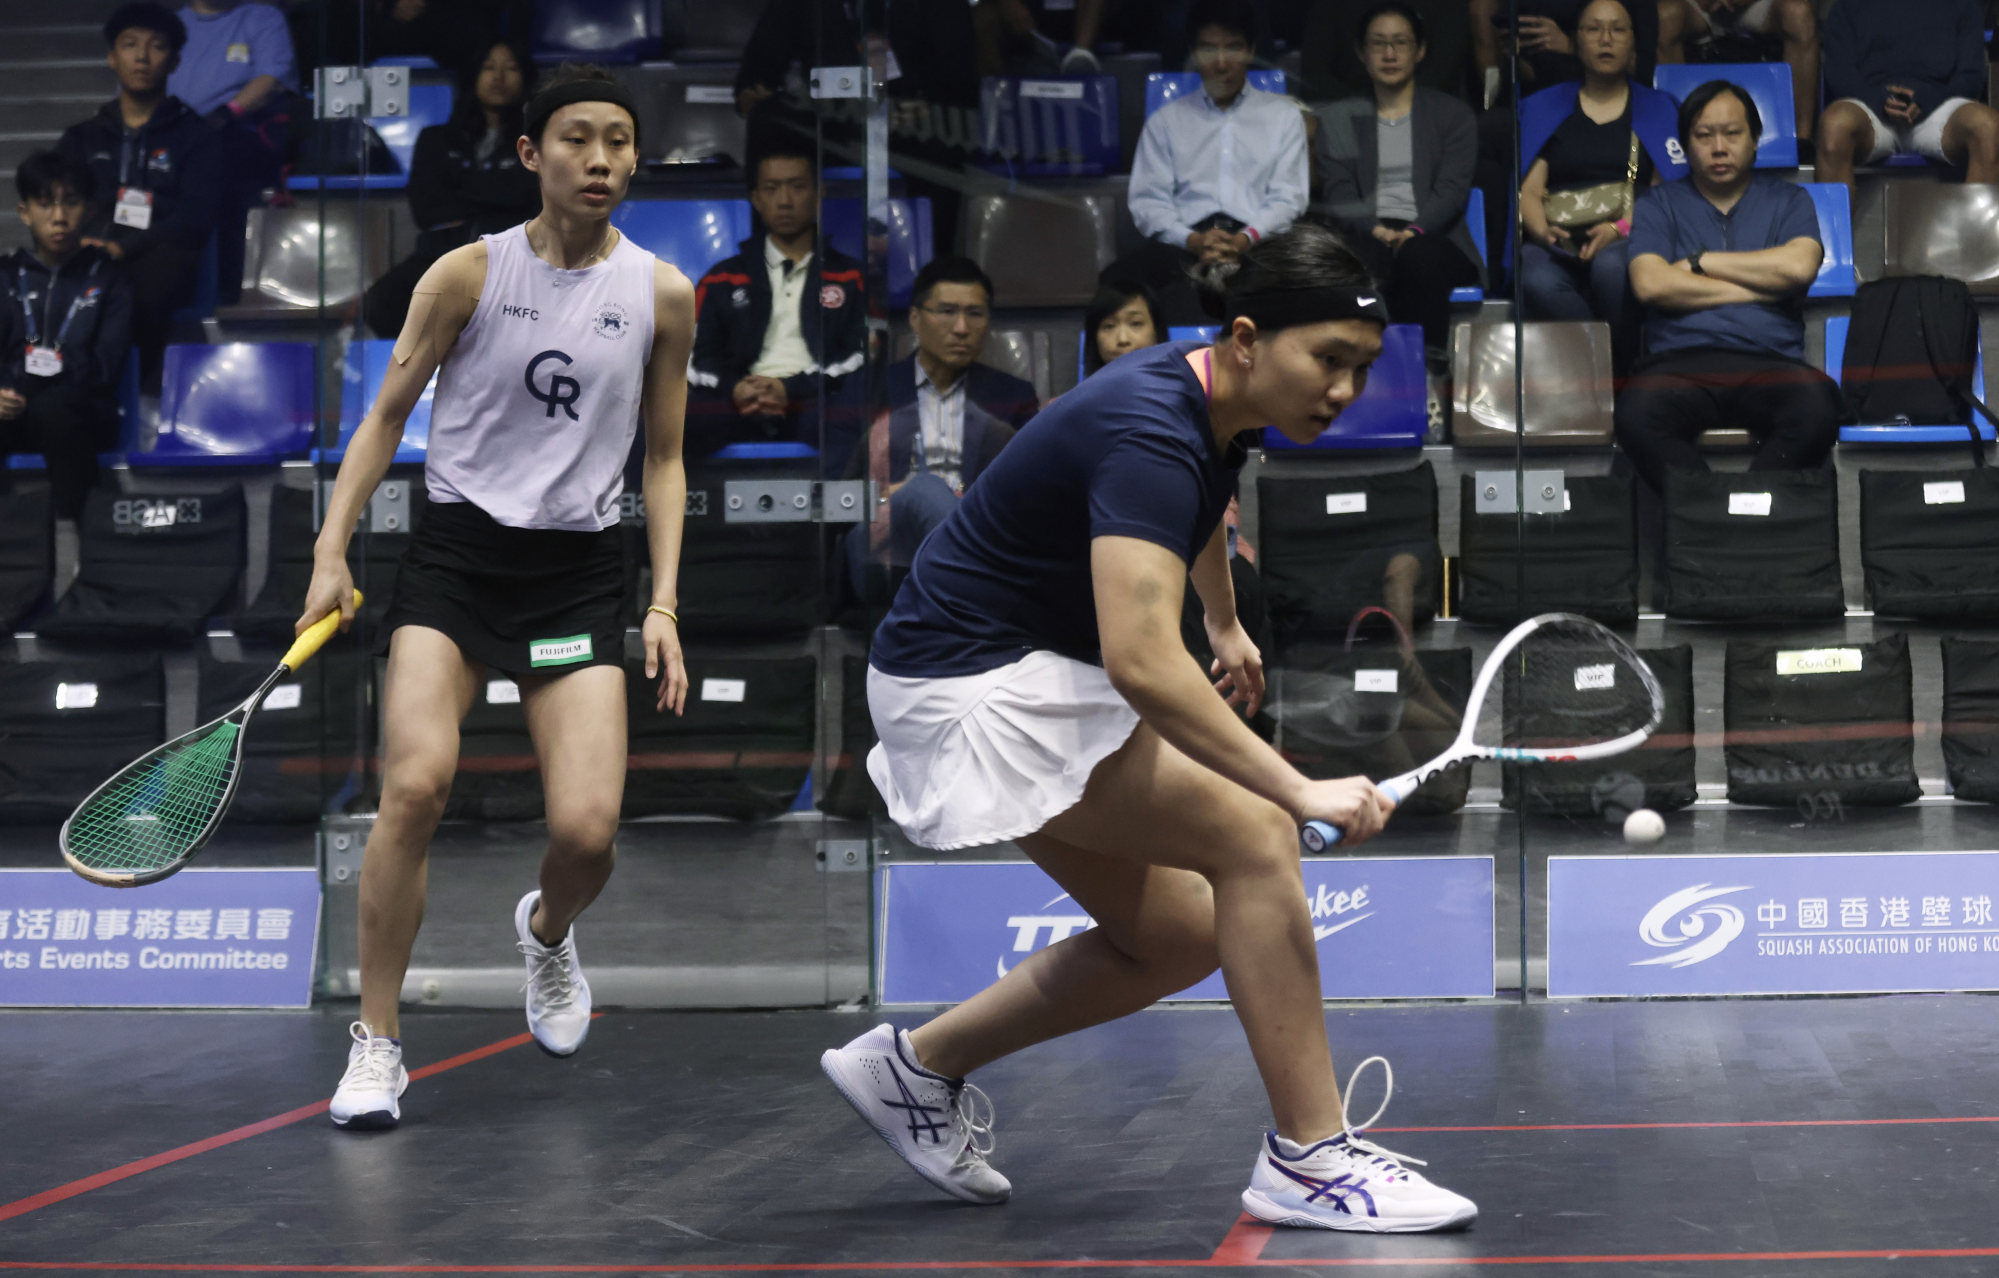 hong kong squash open: tomato ho stuffed – then says her mindset left her ripe for it